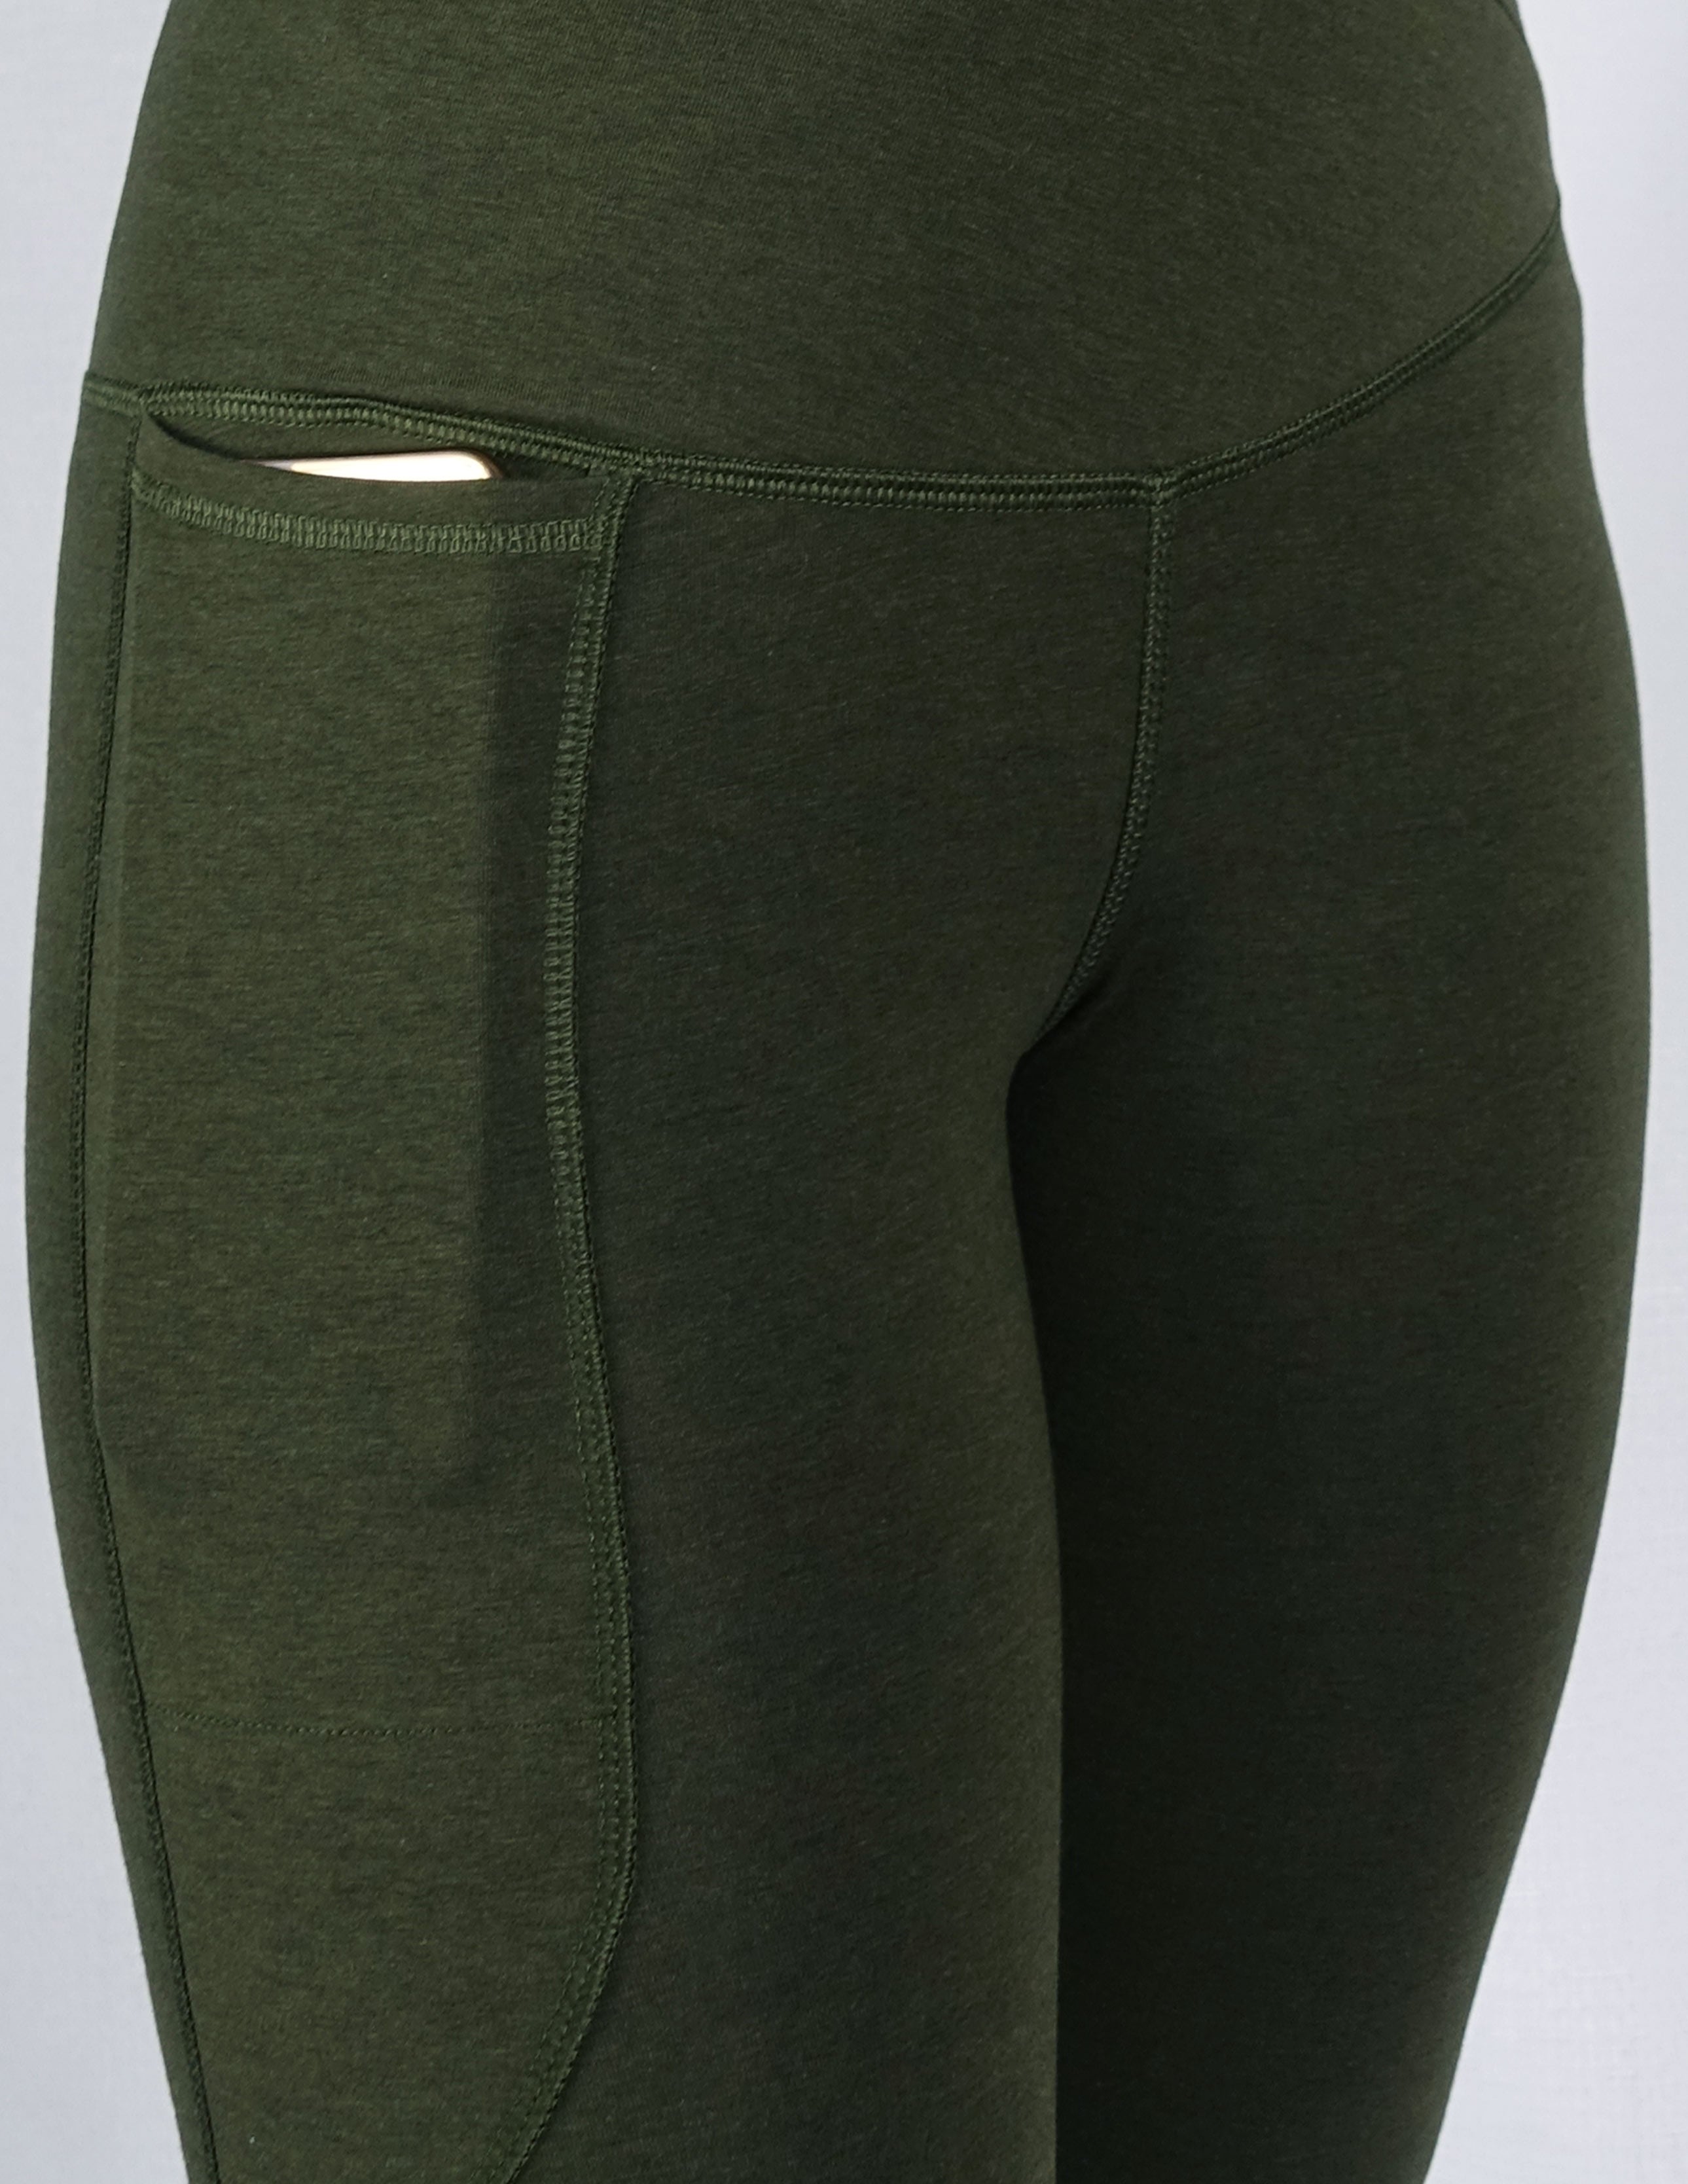 Women's Leggings and Bike Shorts with Phone Pocket